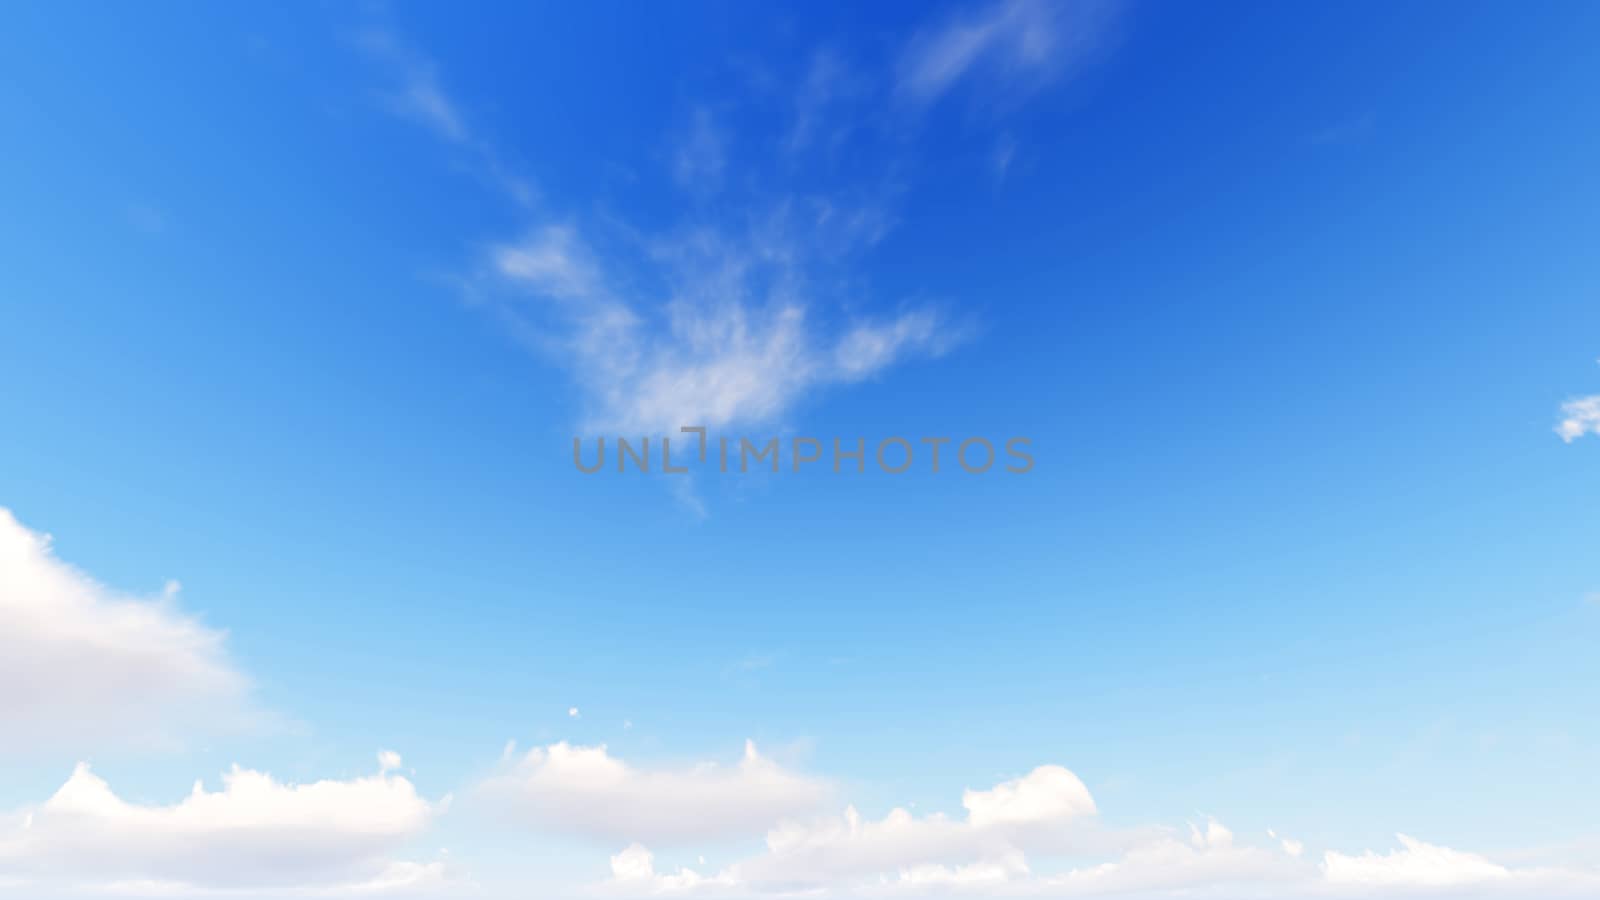 Cloudy blue sky abstract background, blue sky background with ti by teerawit